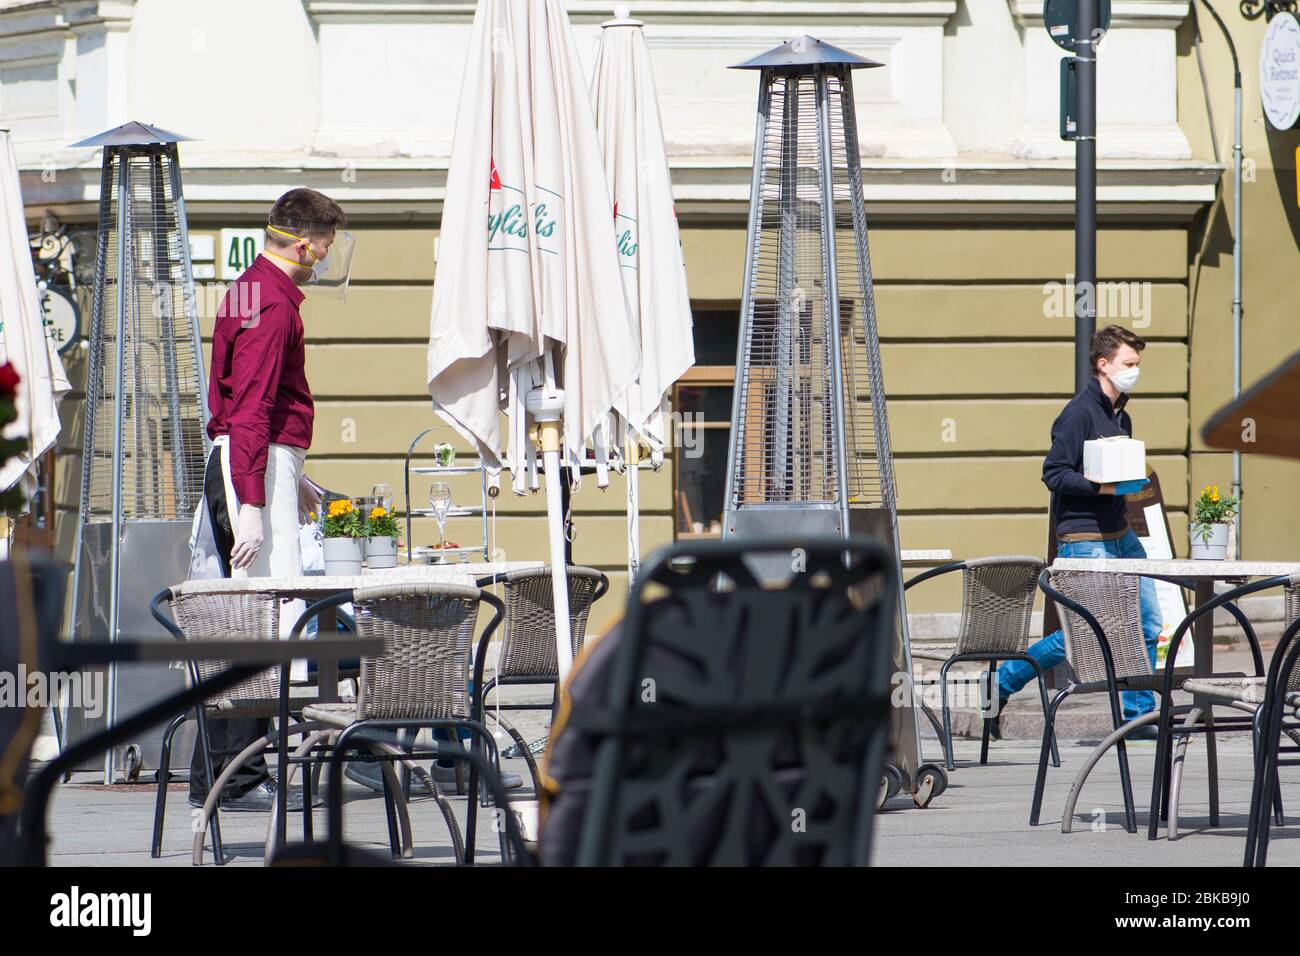 Waiter with a mask disinfects the table of an outdoor bar, café or restaurant, reopen after quarantine restrictions Stock Photo